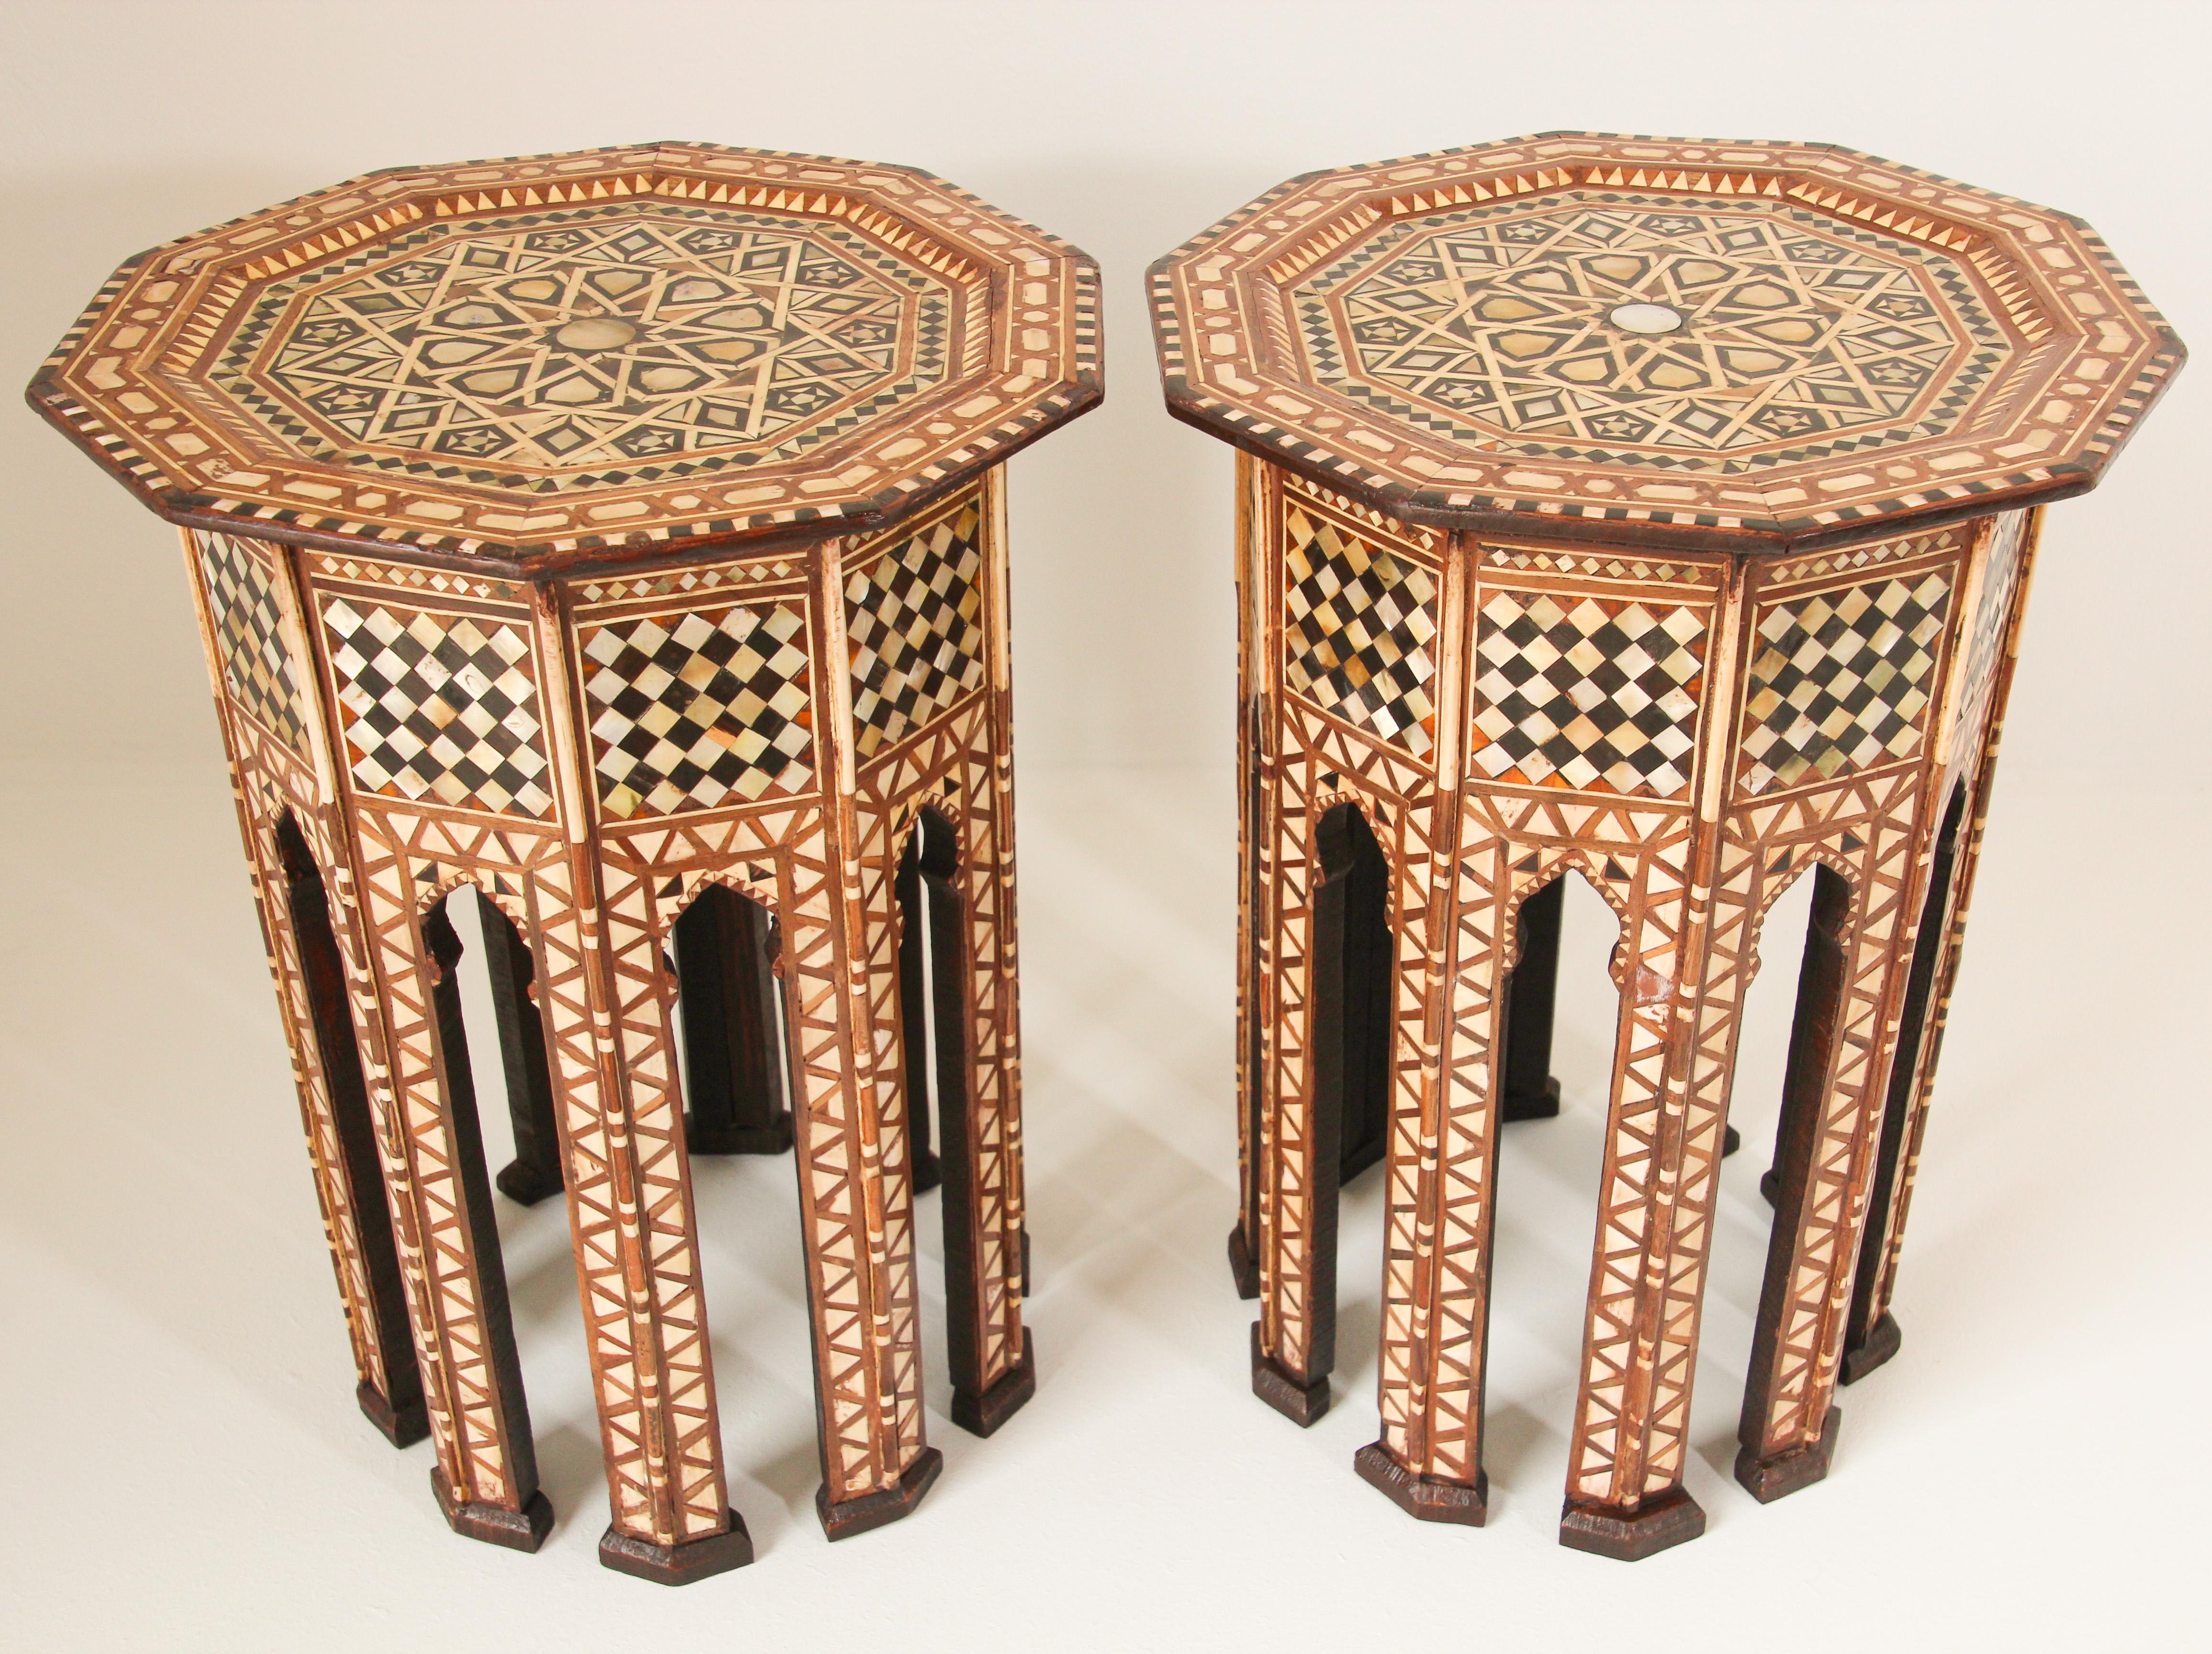 20th Century Middle East Syrian Octagonal Tables Inlaid